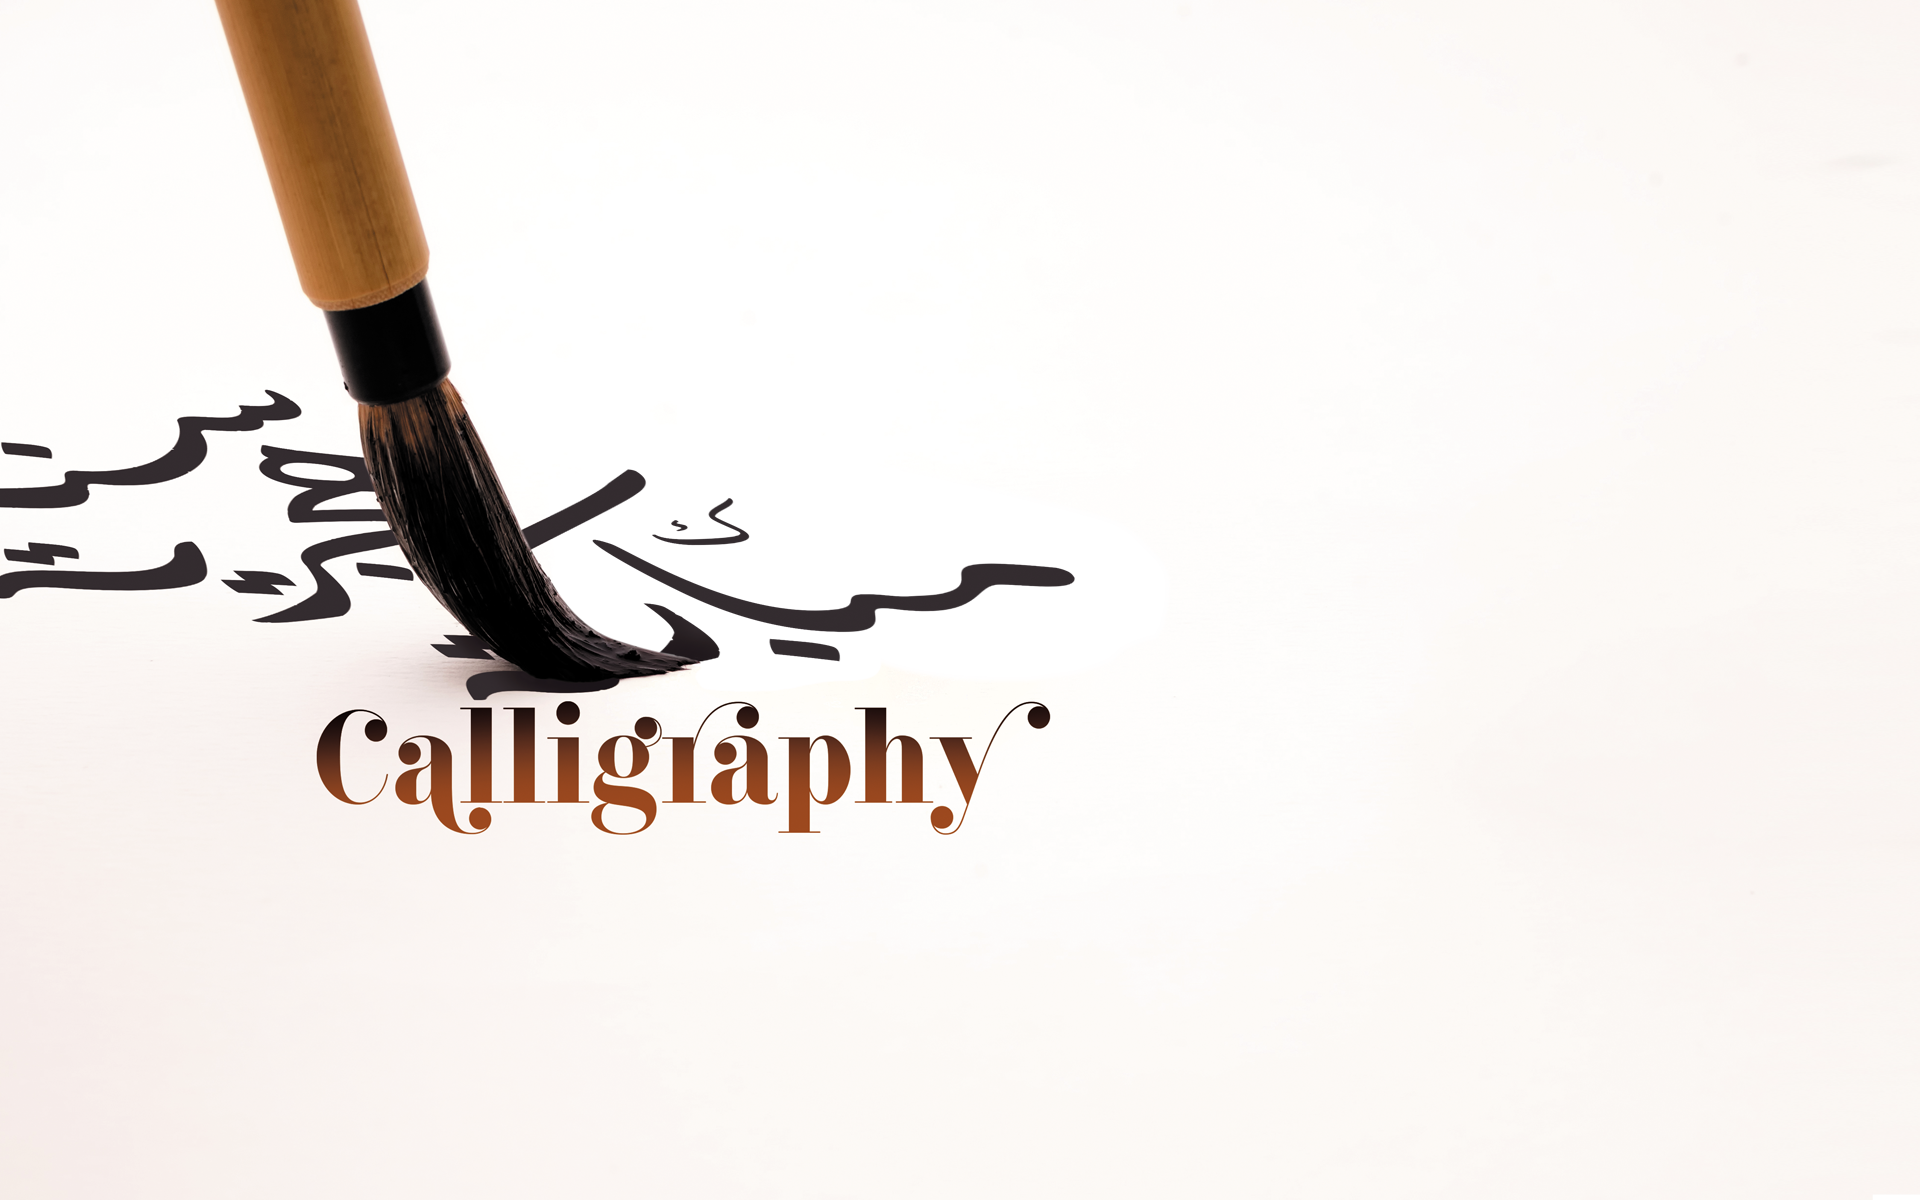 Calligraphy: An Ancient Art of Writing